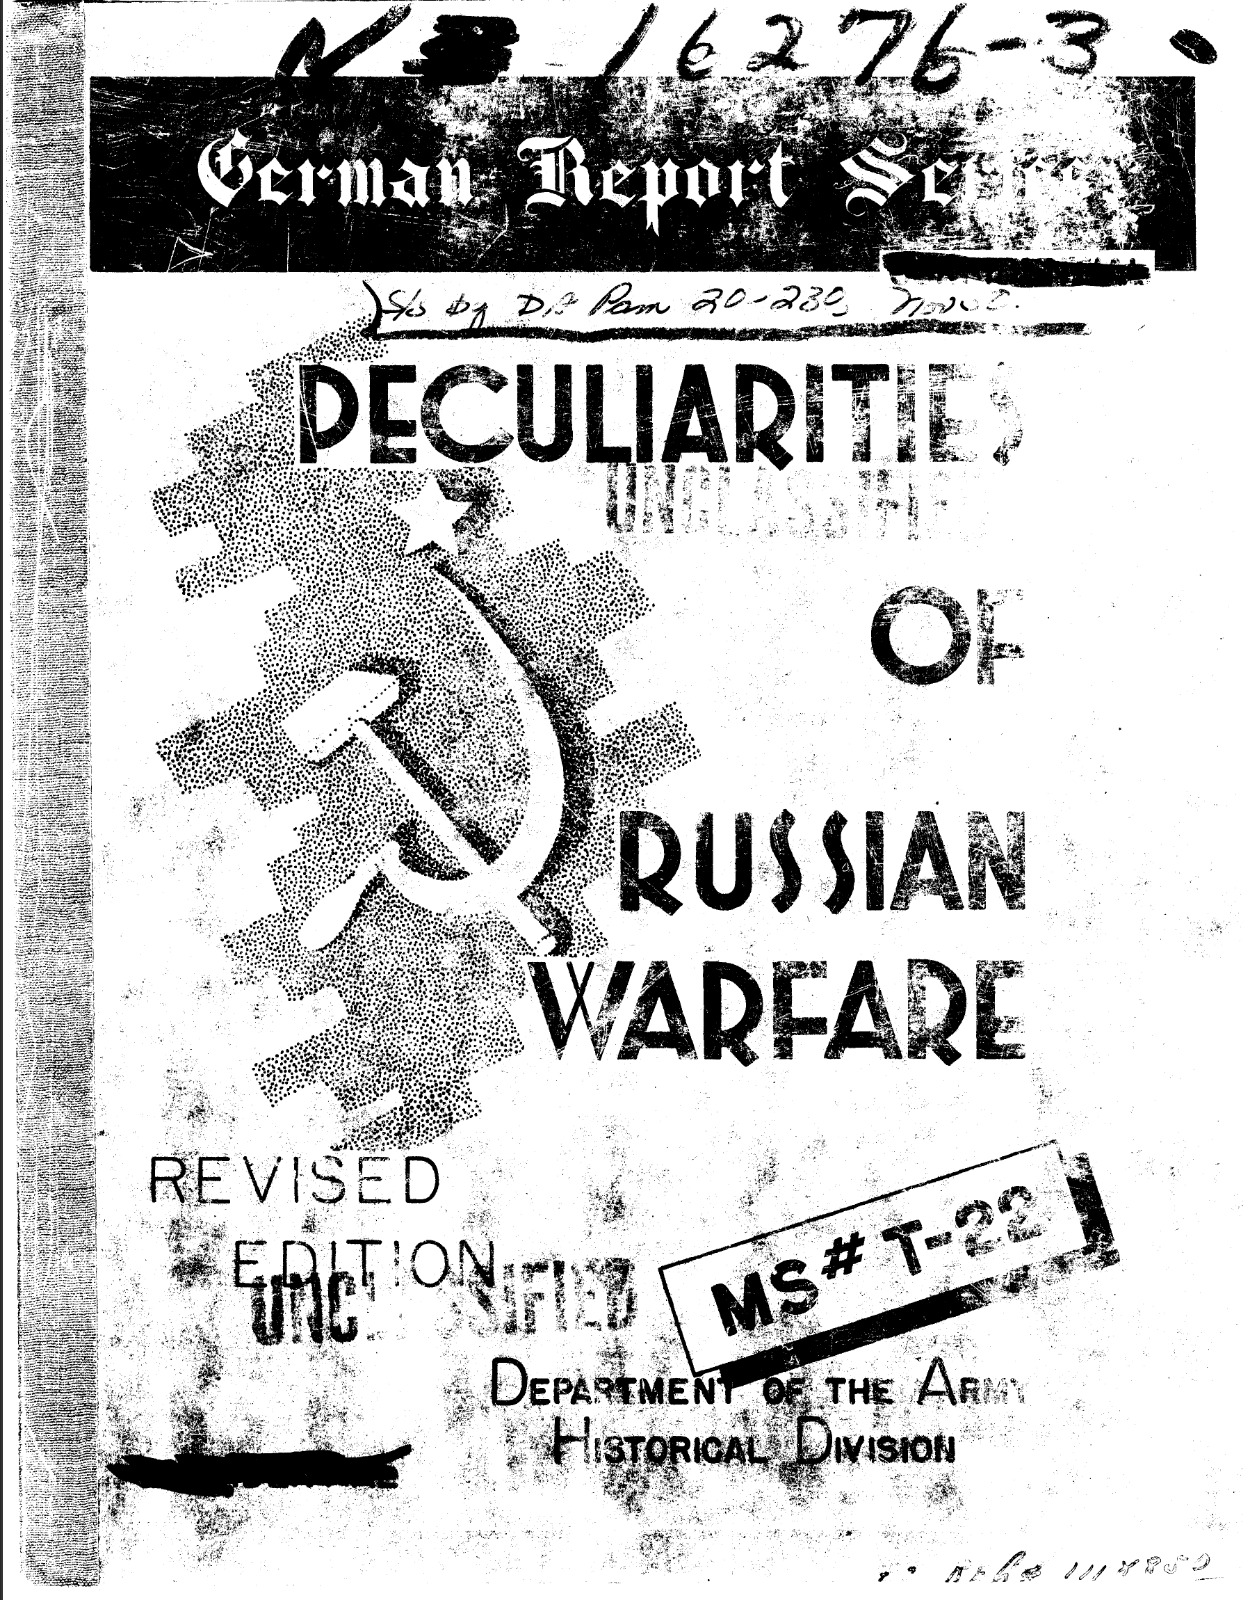 226 Page Peculiarities of Russian Warfare 1947 Revised Edition Book on Data CD